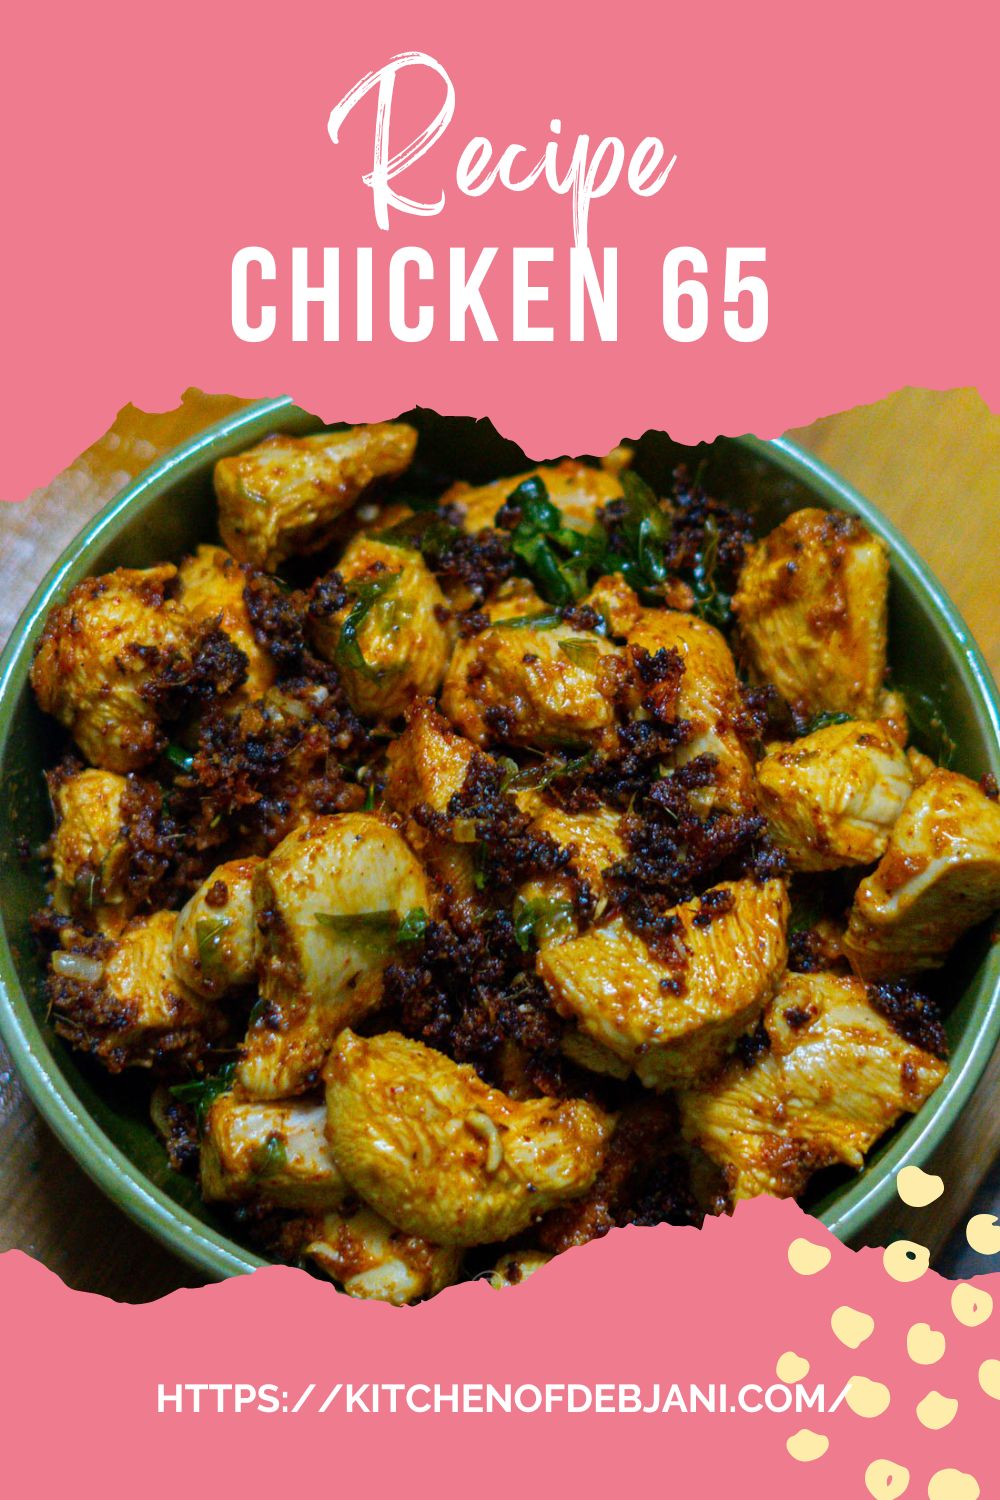 %Chicken 65 how to make at home Food Pinterest Pin